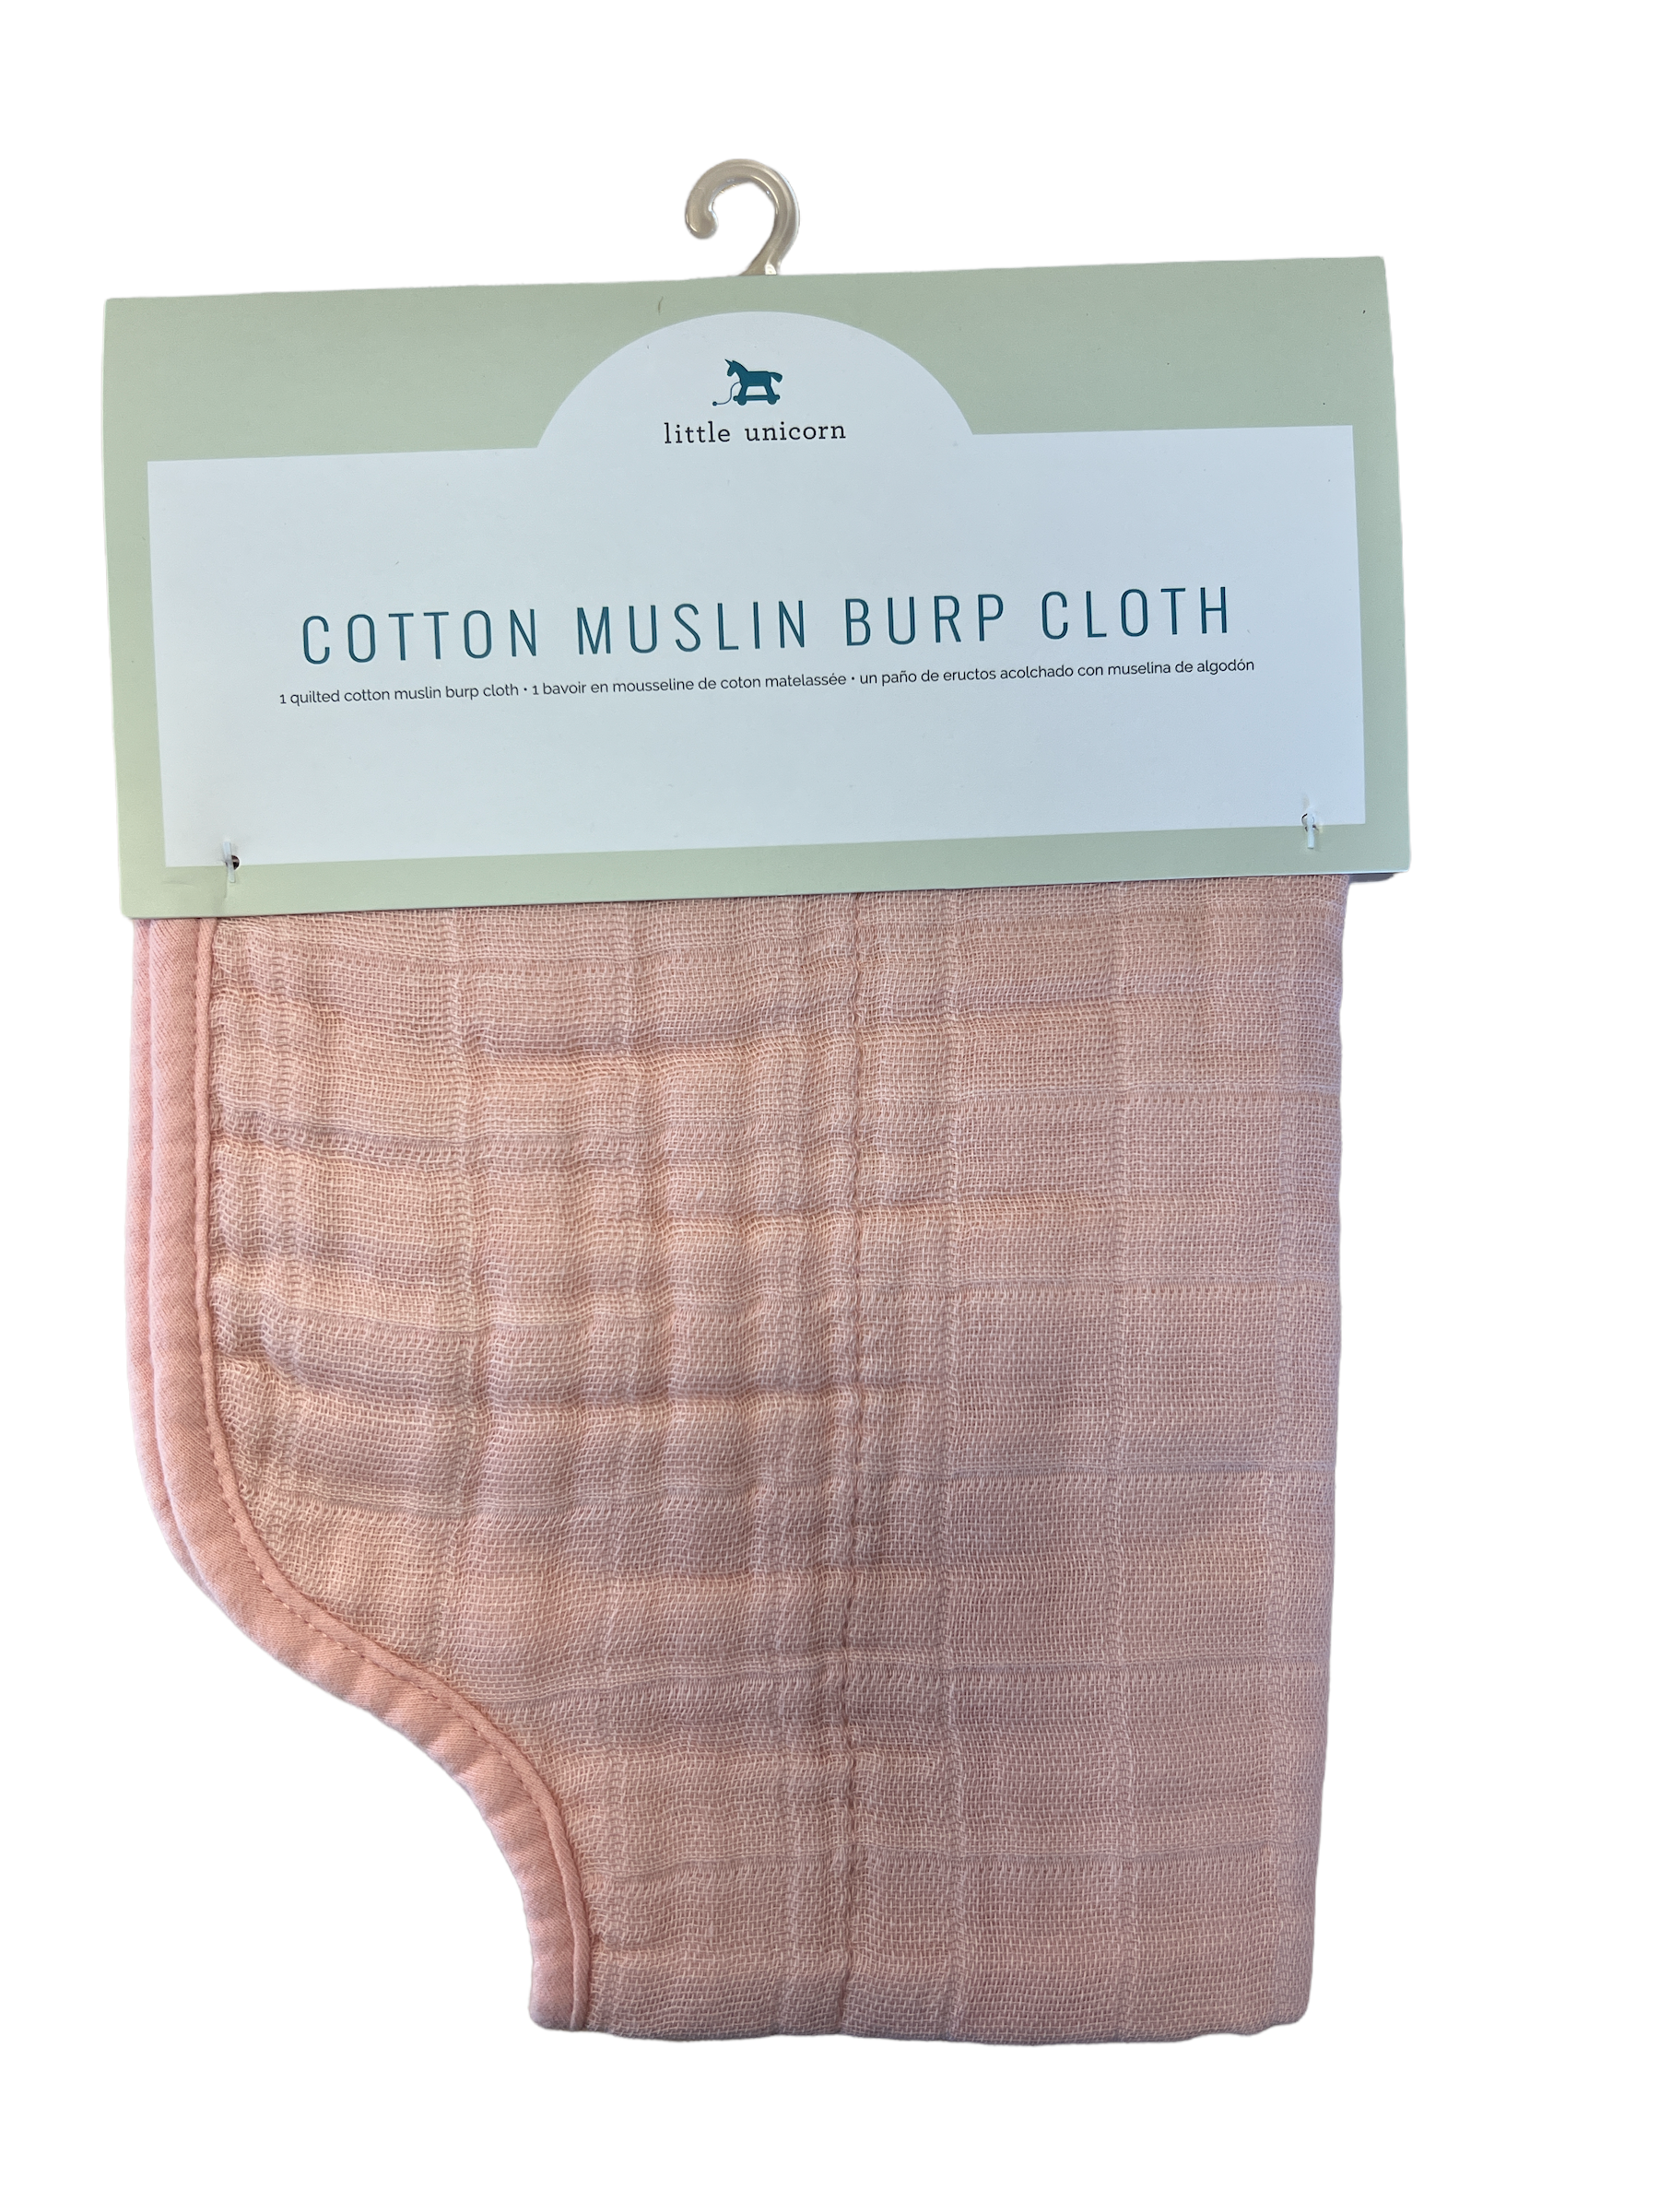 Cotton Muslin Burp Cloth - Rose Petal-520 Baby & Kids Gifts-Simply Stylish Boutique-Simply Stylish Boutique | Women’s & Kid’s Fashion | Paducah, KY